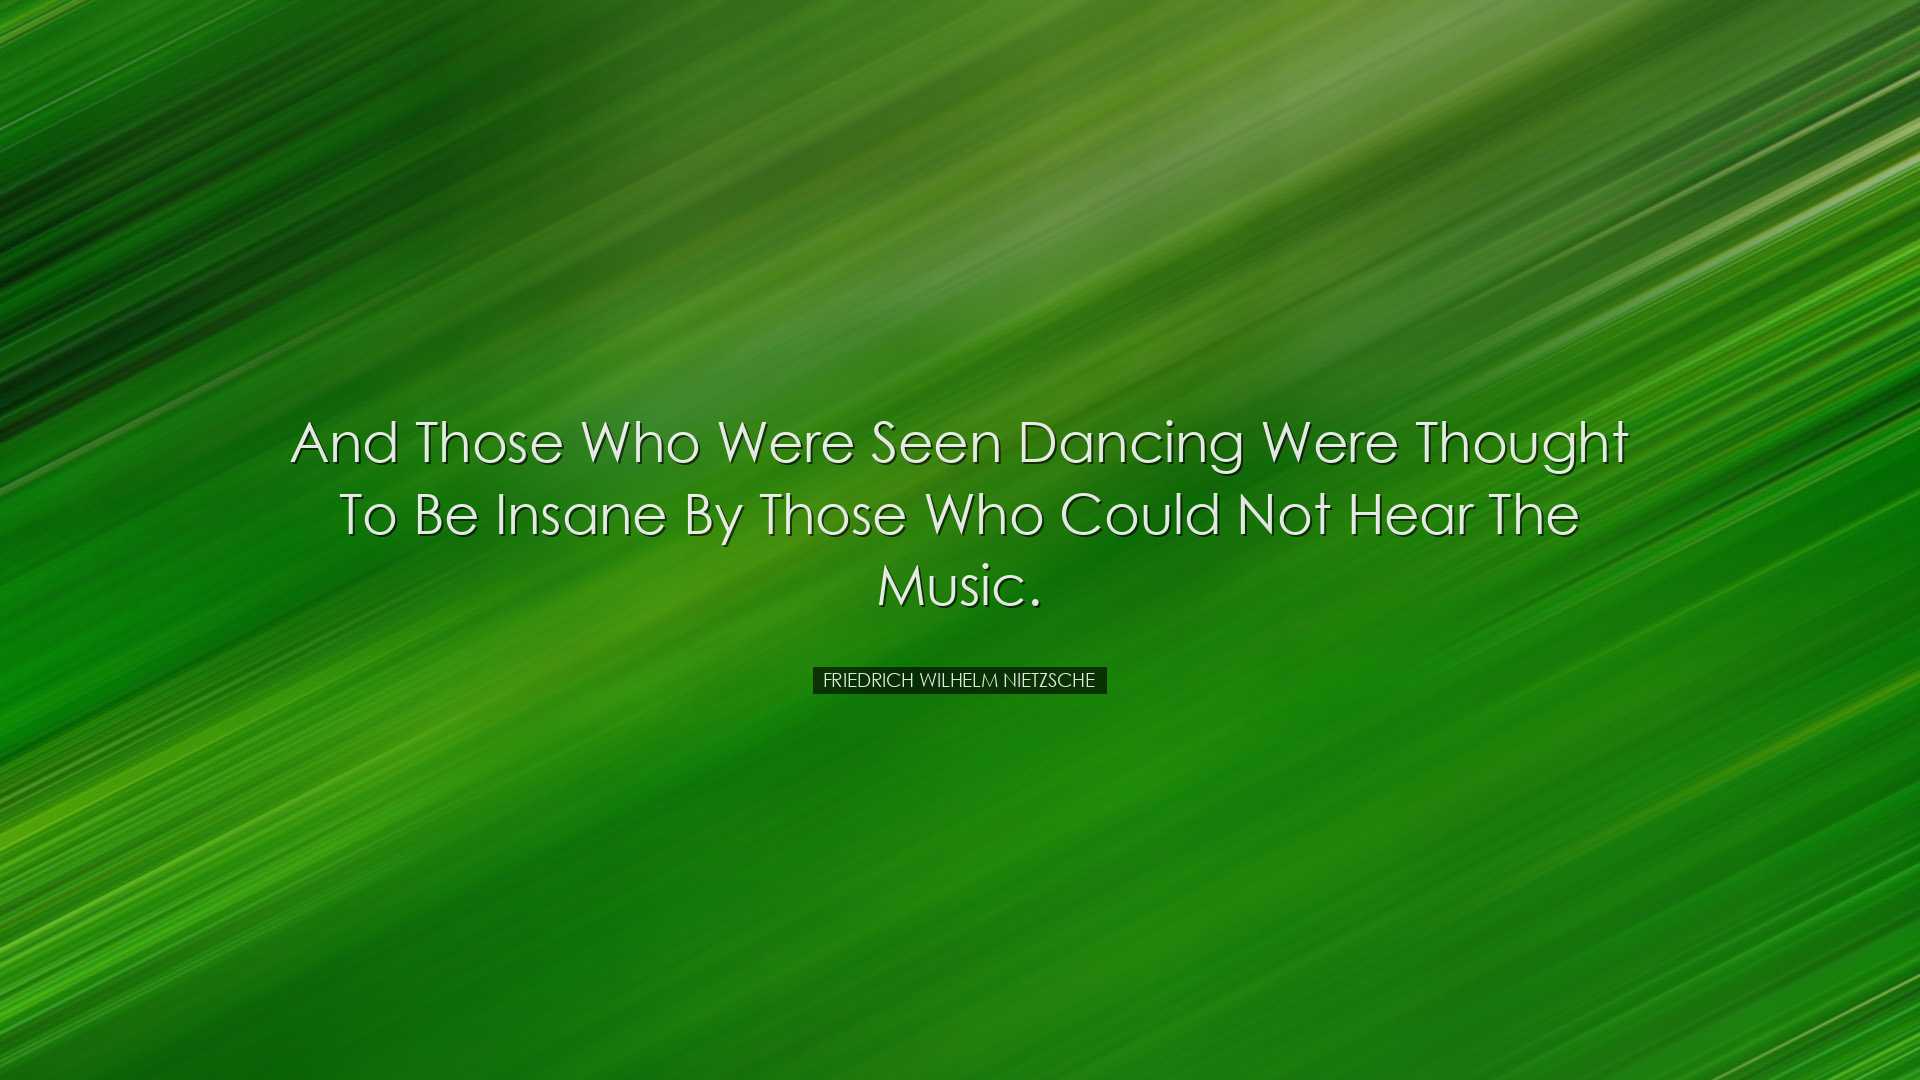 And those who were seen dancing were thought to be insane by those